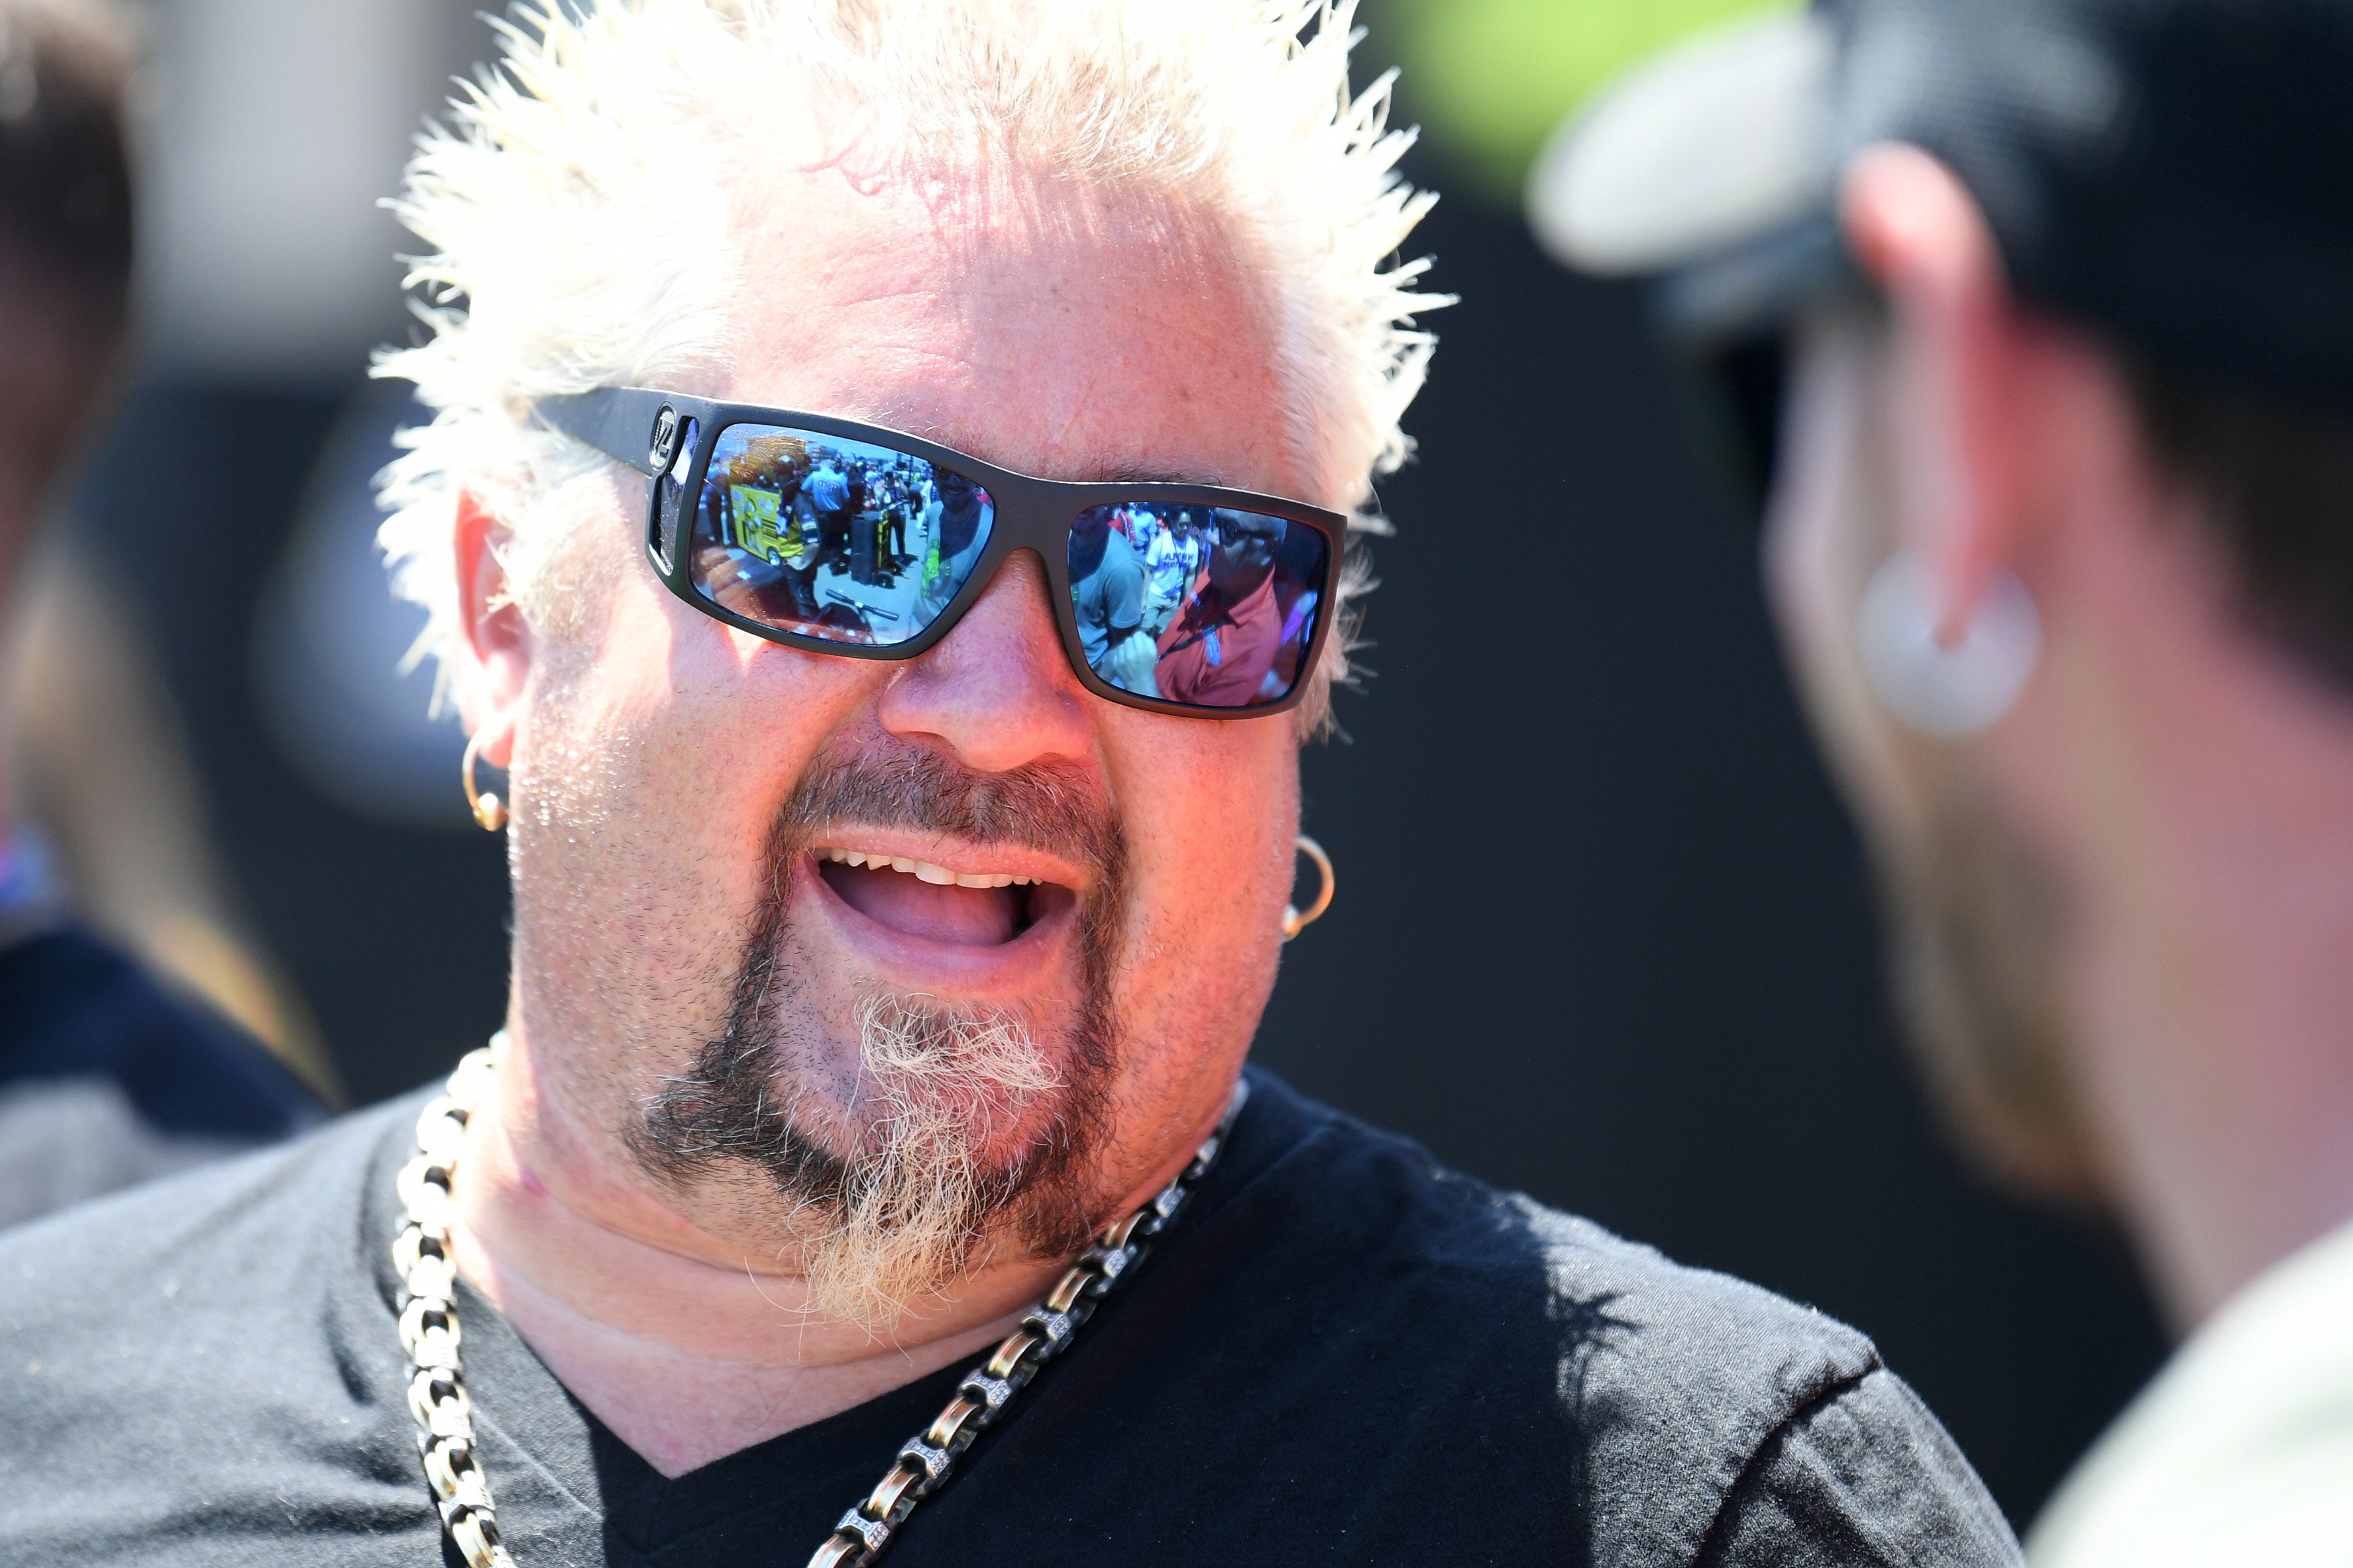 Celebrity chef Guy Fieri hangs out during qualifying for the Monster Energy NASCAR Cup Series Toyota/Save Mart 350 at Sonoma Raceway on June 22, 2019 in Sonoma, California.